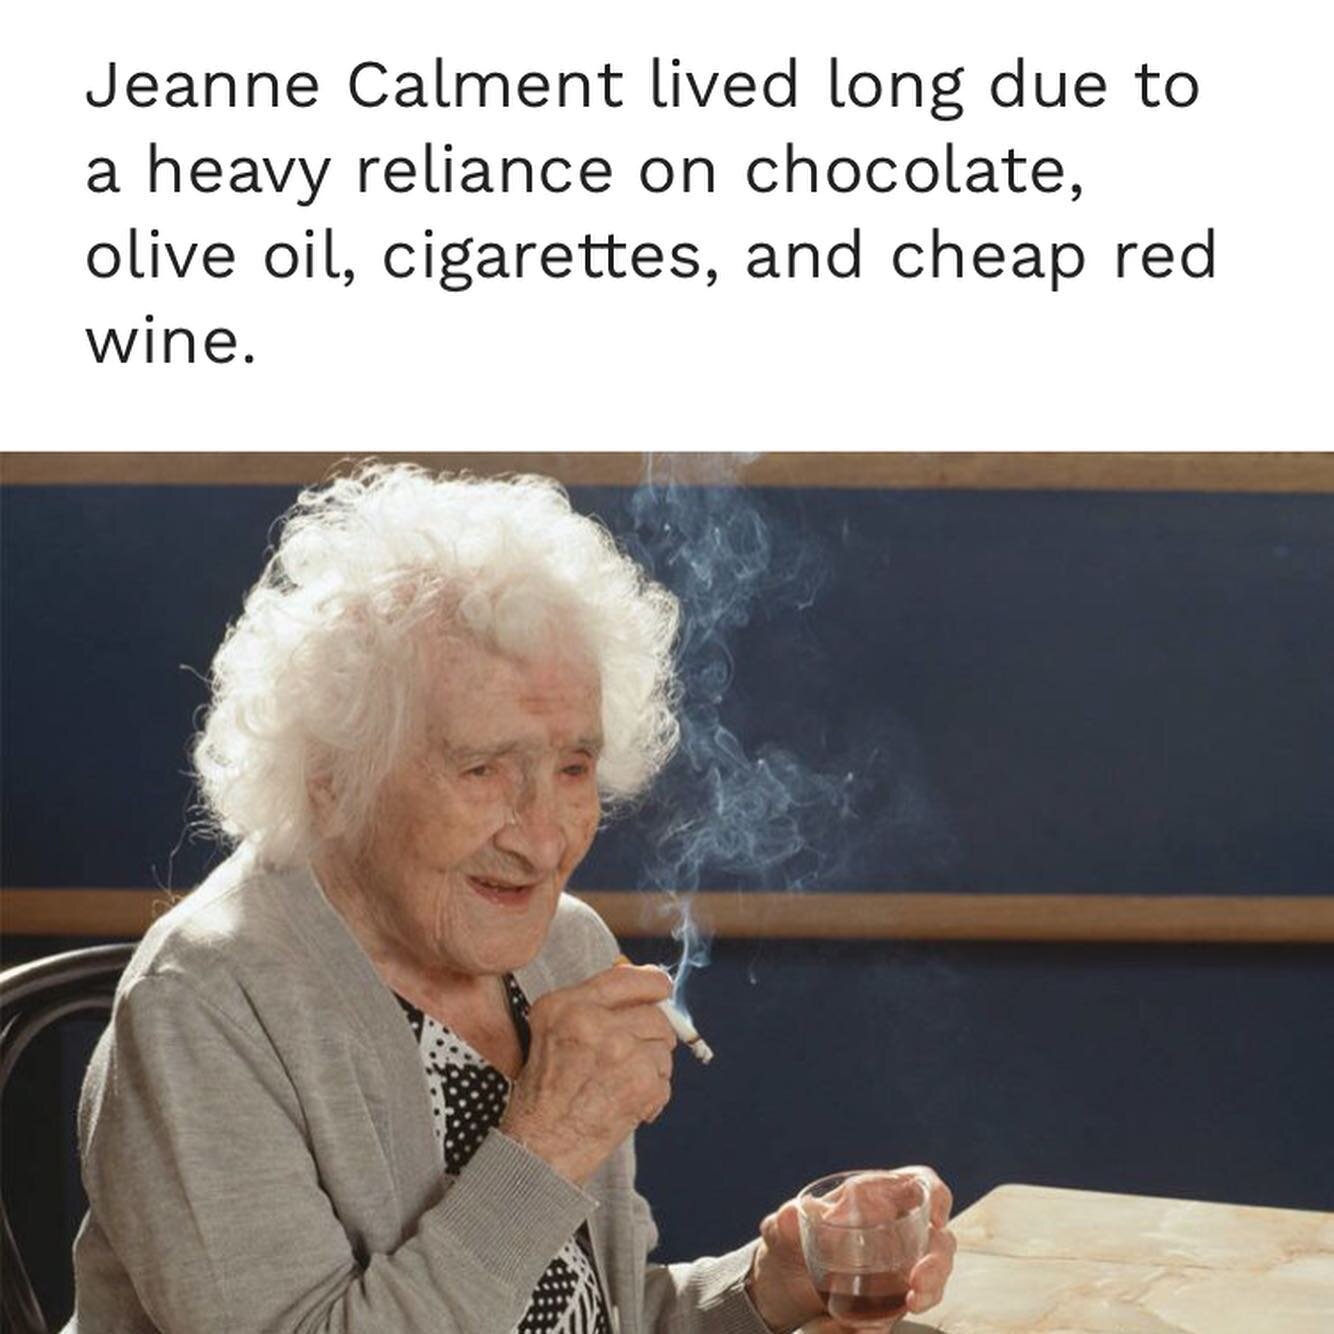 When she turned 110 Jeanne Calment said, &ldquo;I've only ever had one wrinkle, and I'm sitting on it.&rdquo;

The world&rsquo;s oldest woman lived to 122 and did whatever the hell she wanted. Which included dousing her body in olive oil every day, a